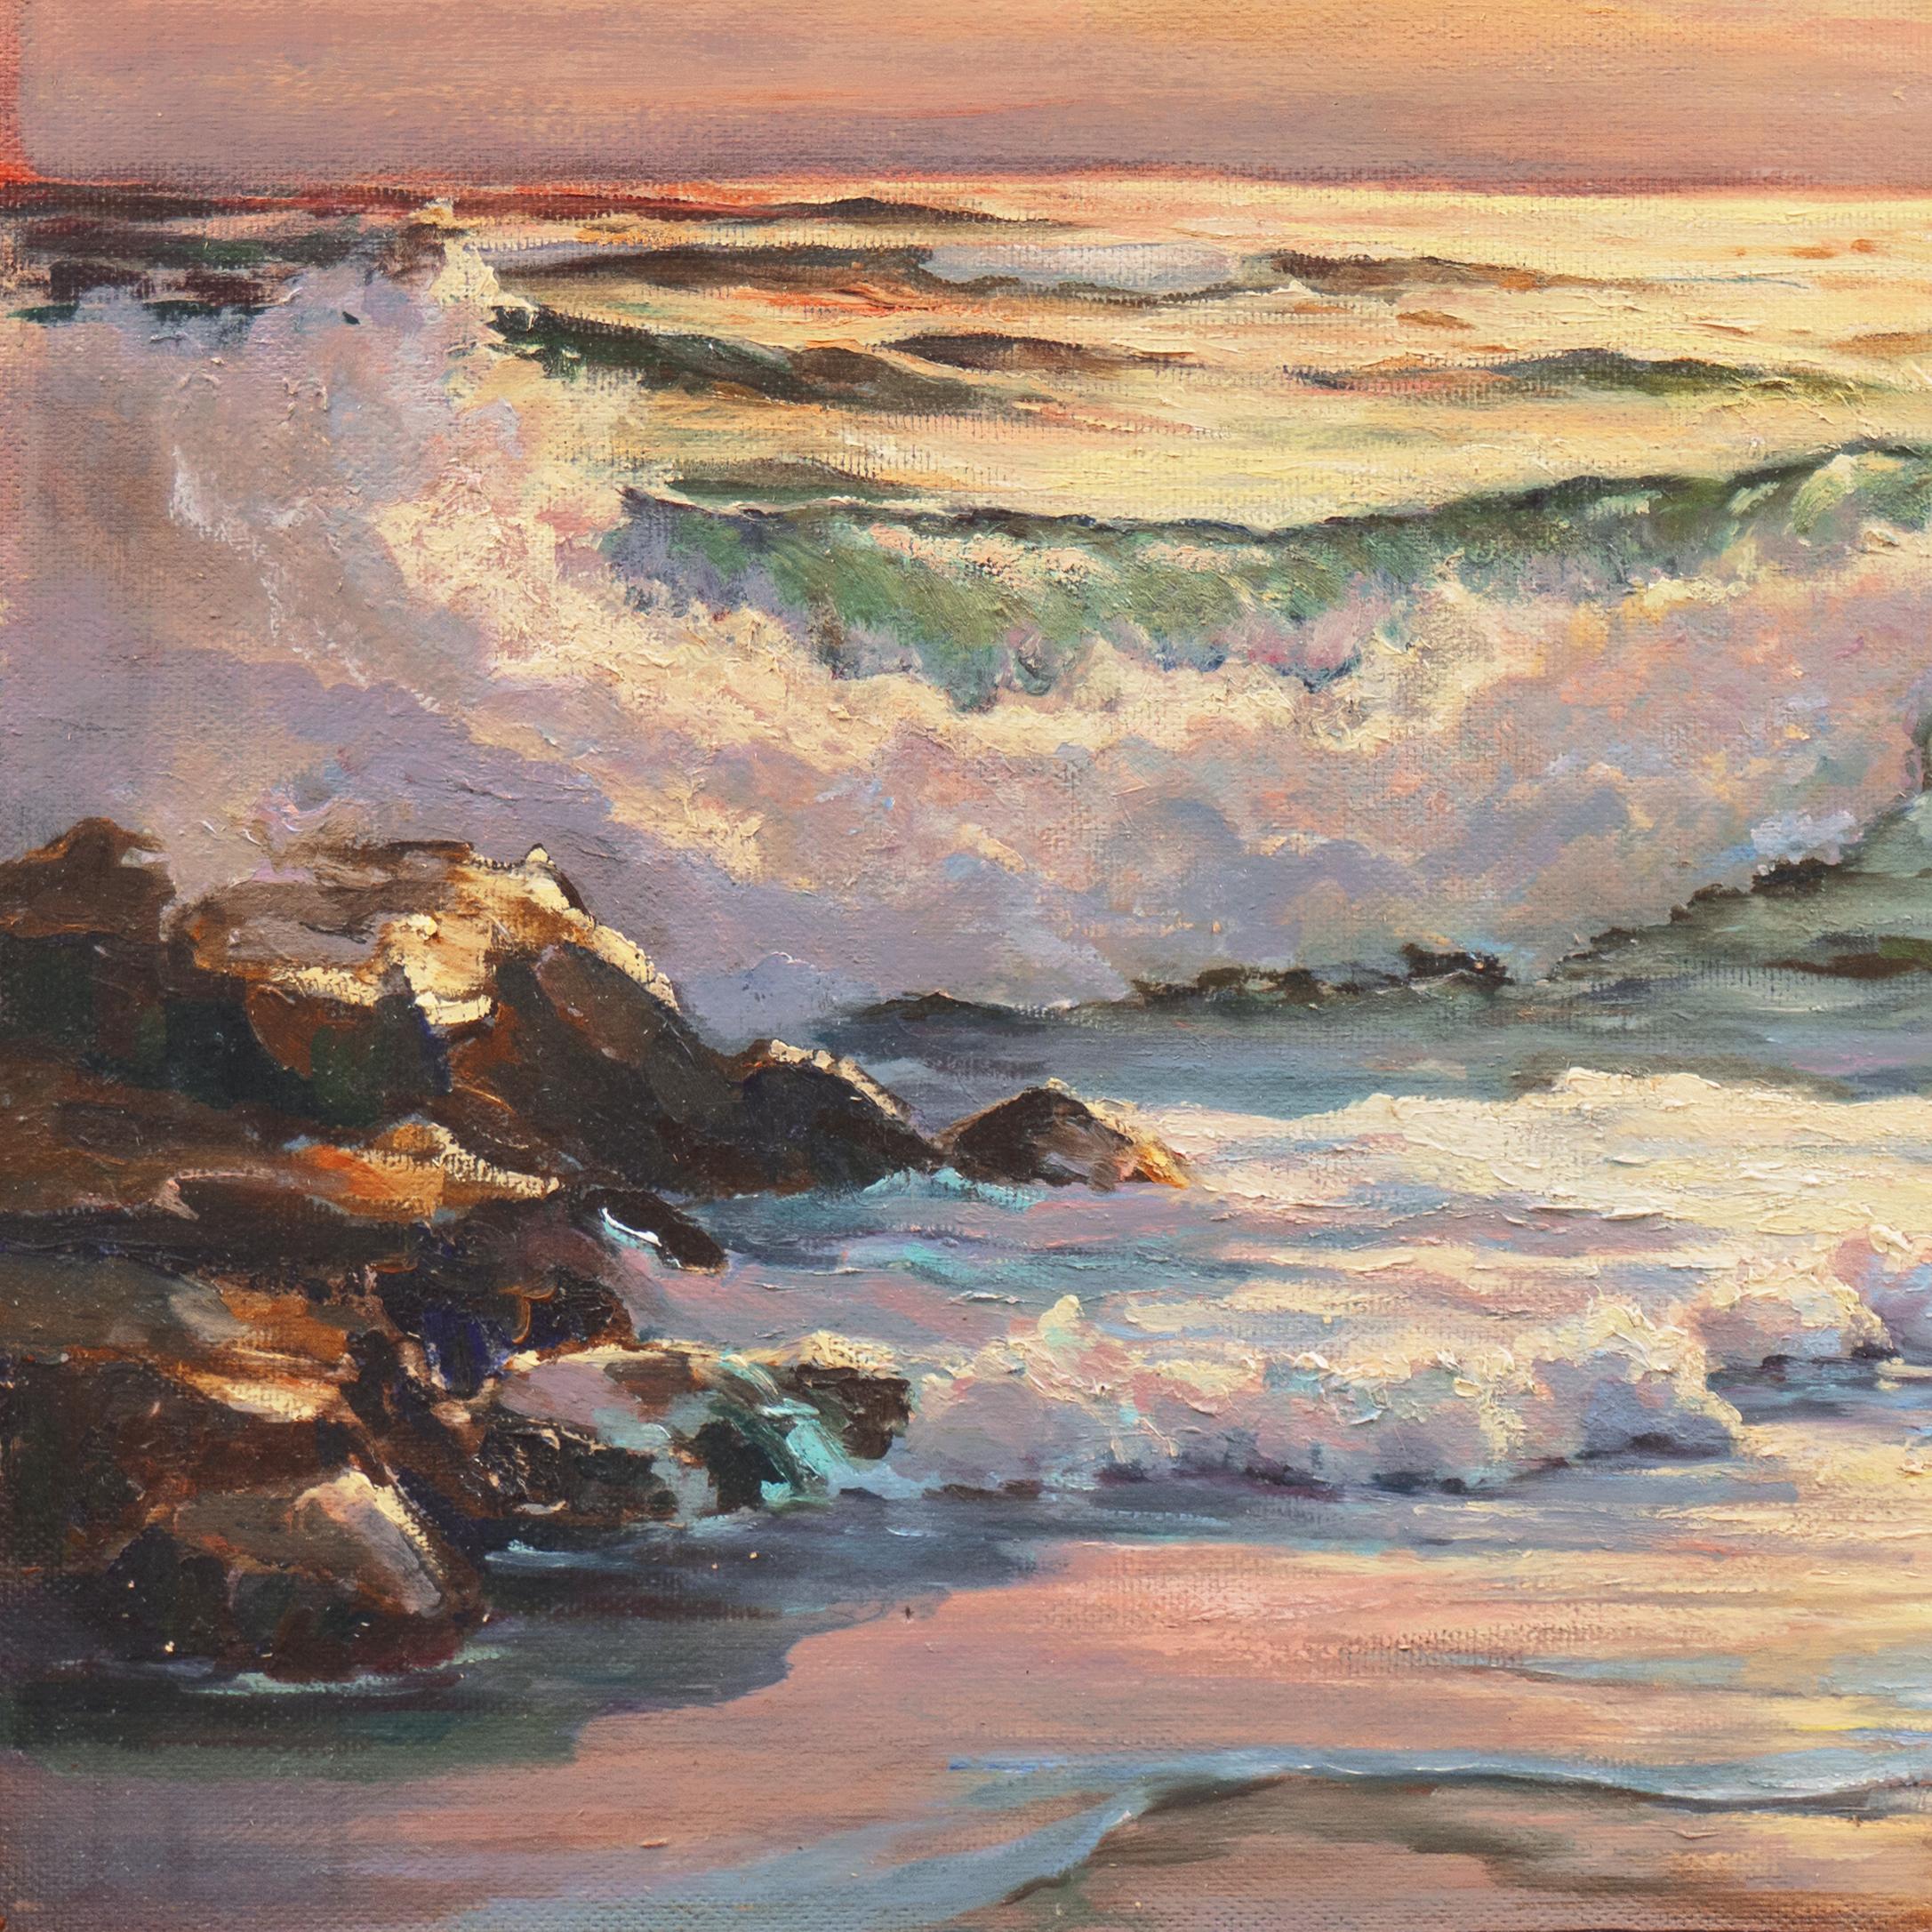 'Evening Waves', Pacific Coastal Seascape - Post-Impressionist Painting by Bea Sonnenberg